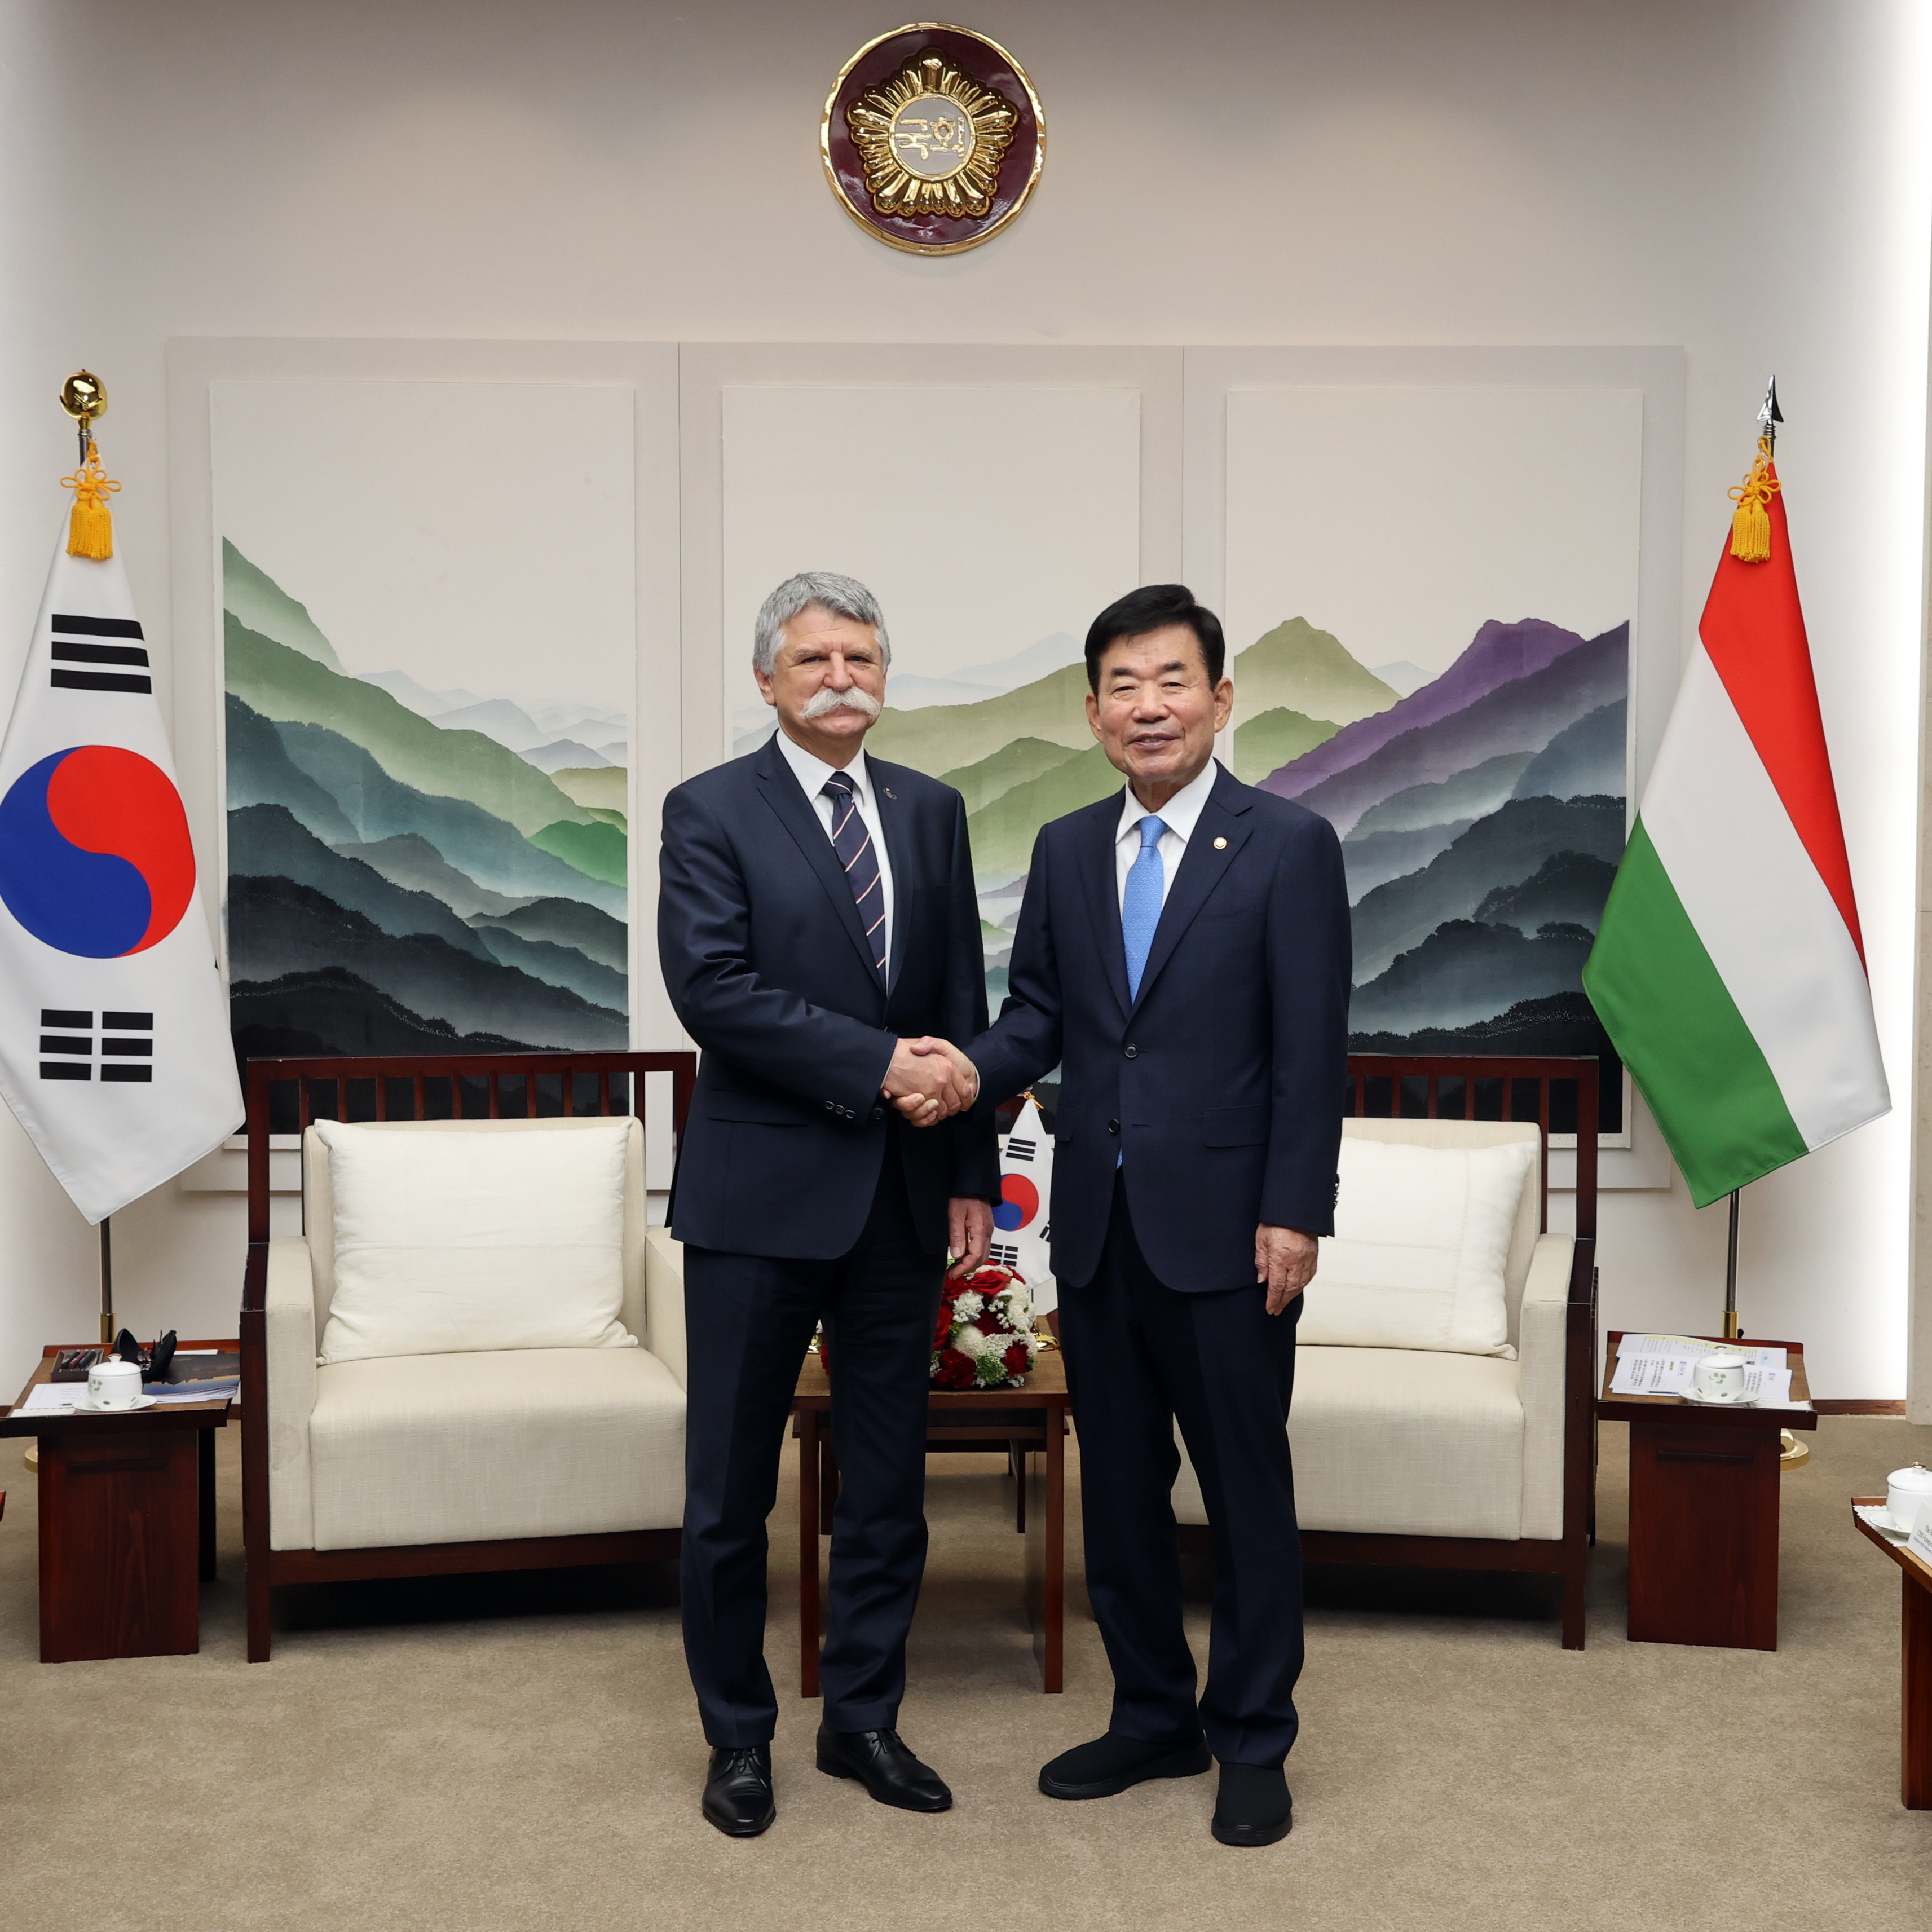 Speaker Kim meets with Hungarian counterpart K&ouml;v&eacute;r 관련사진 2 보기